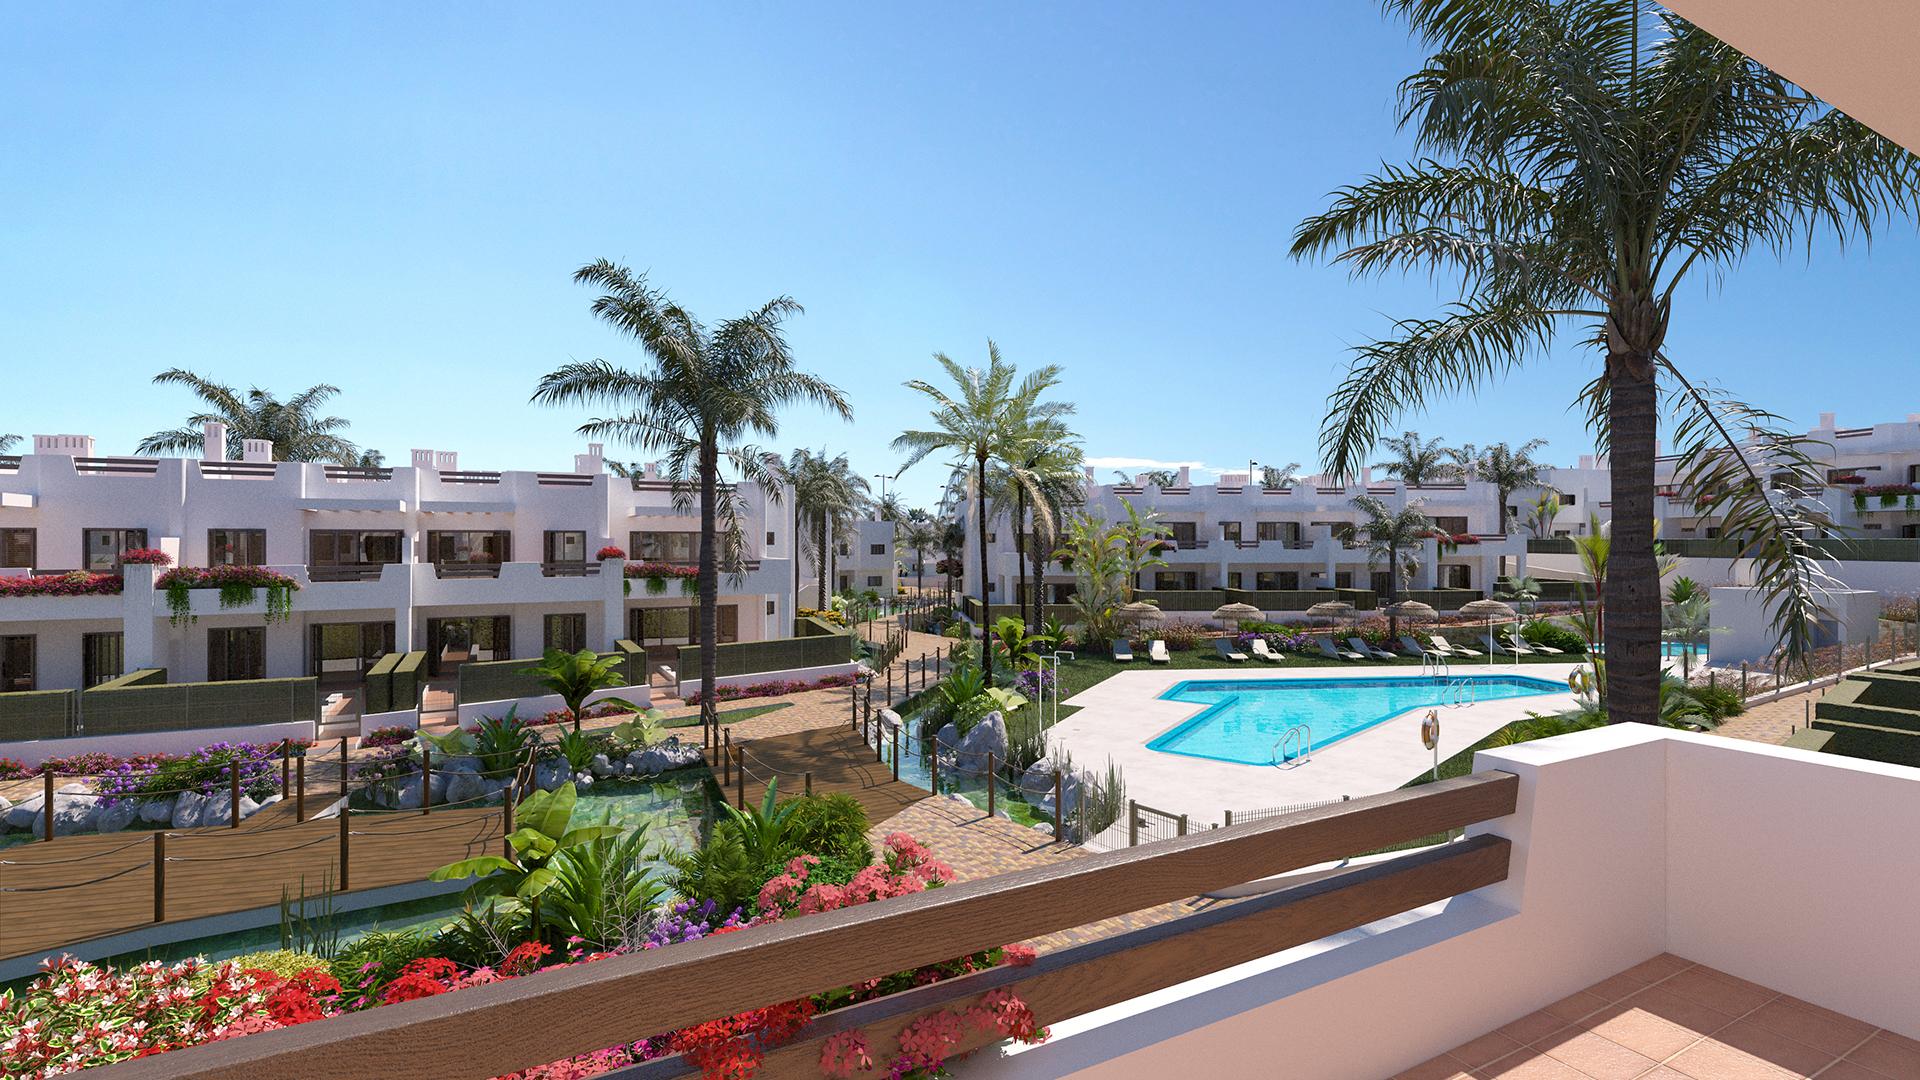 2 Bedroom Apartment with roof terrace in Mar de Pulpi phase 8 in Medvilla Spanje